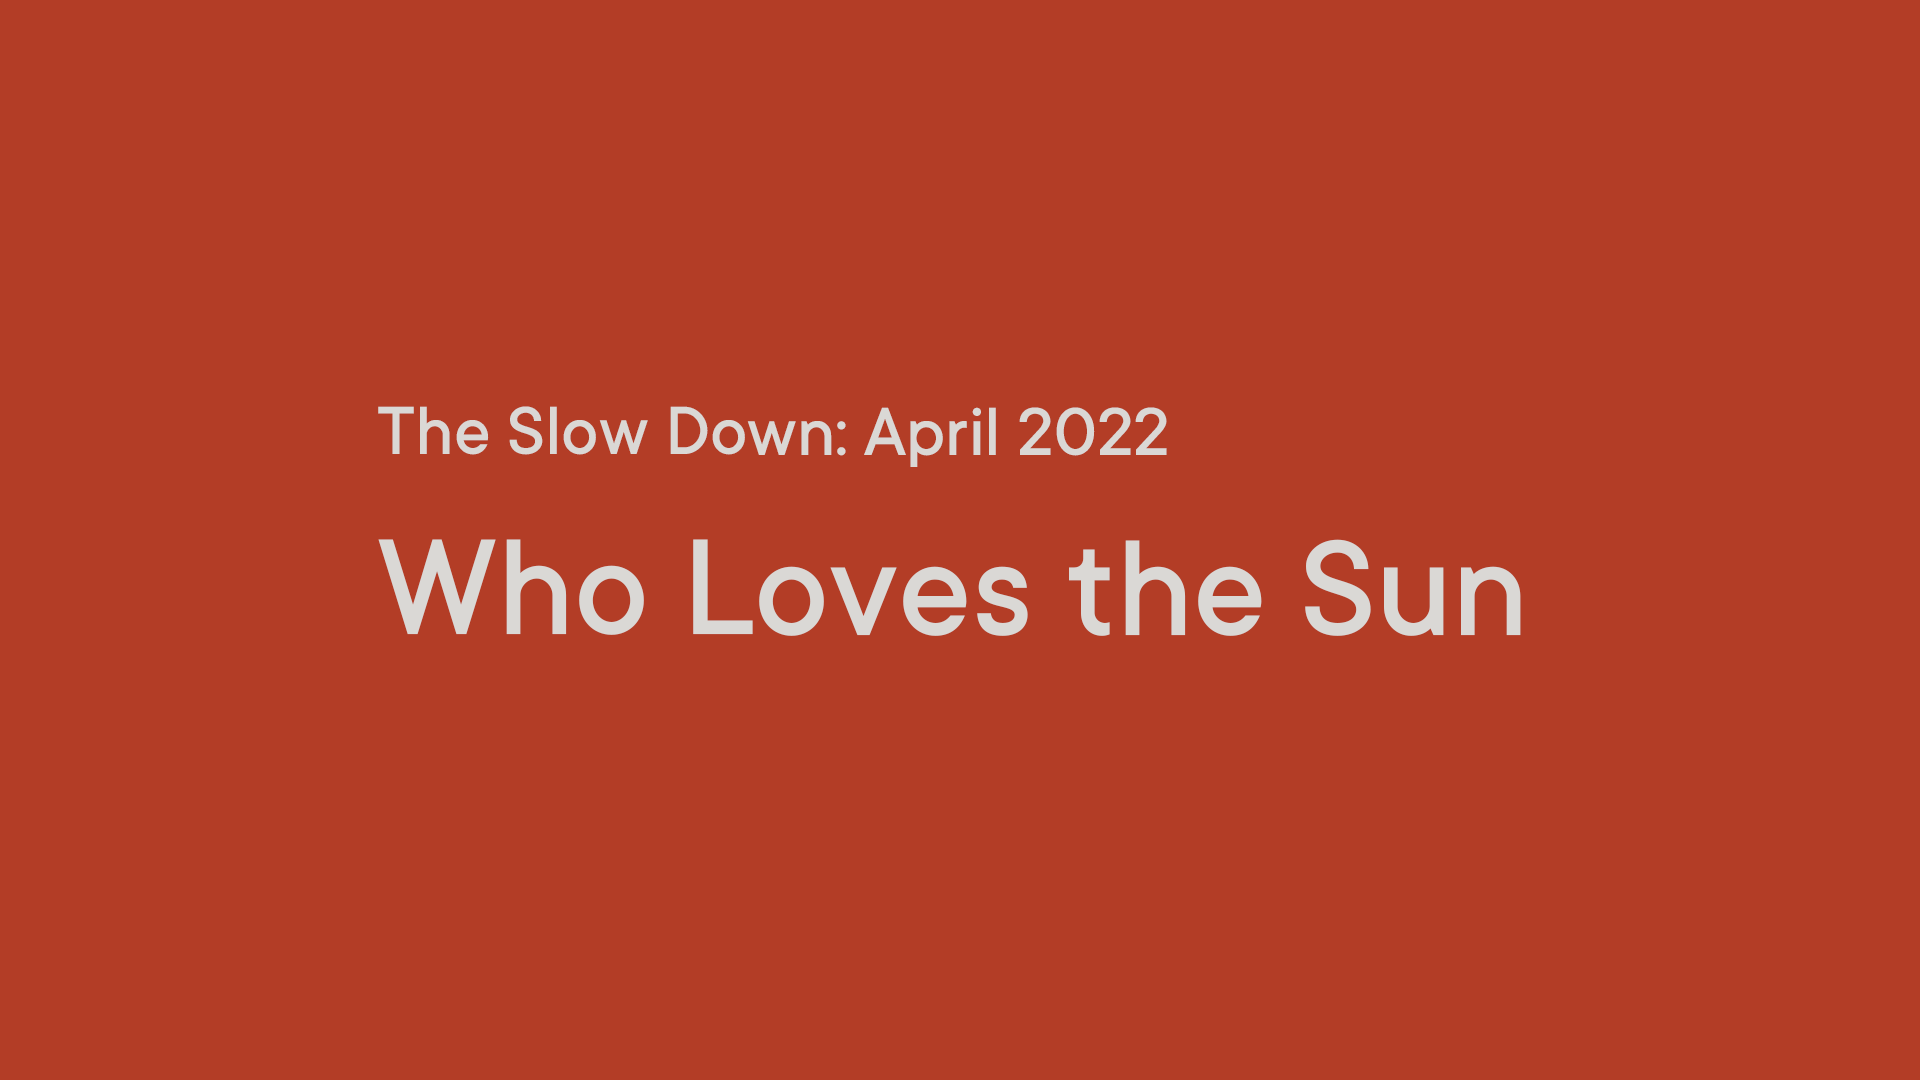 The Slow Down: Who Loves the Sun